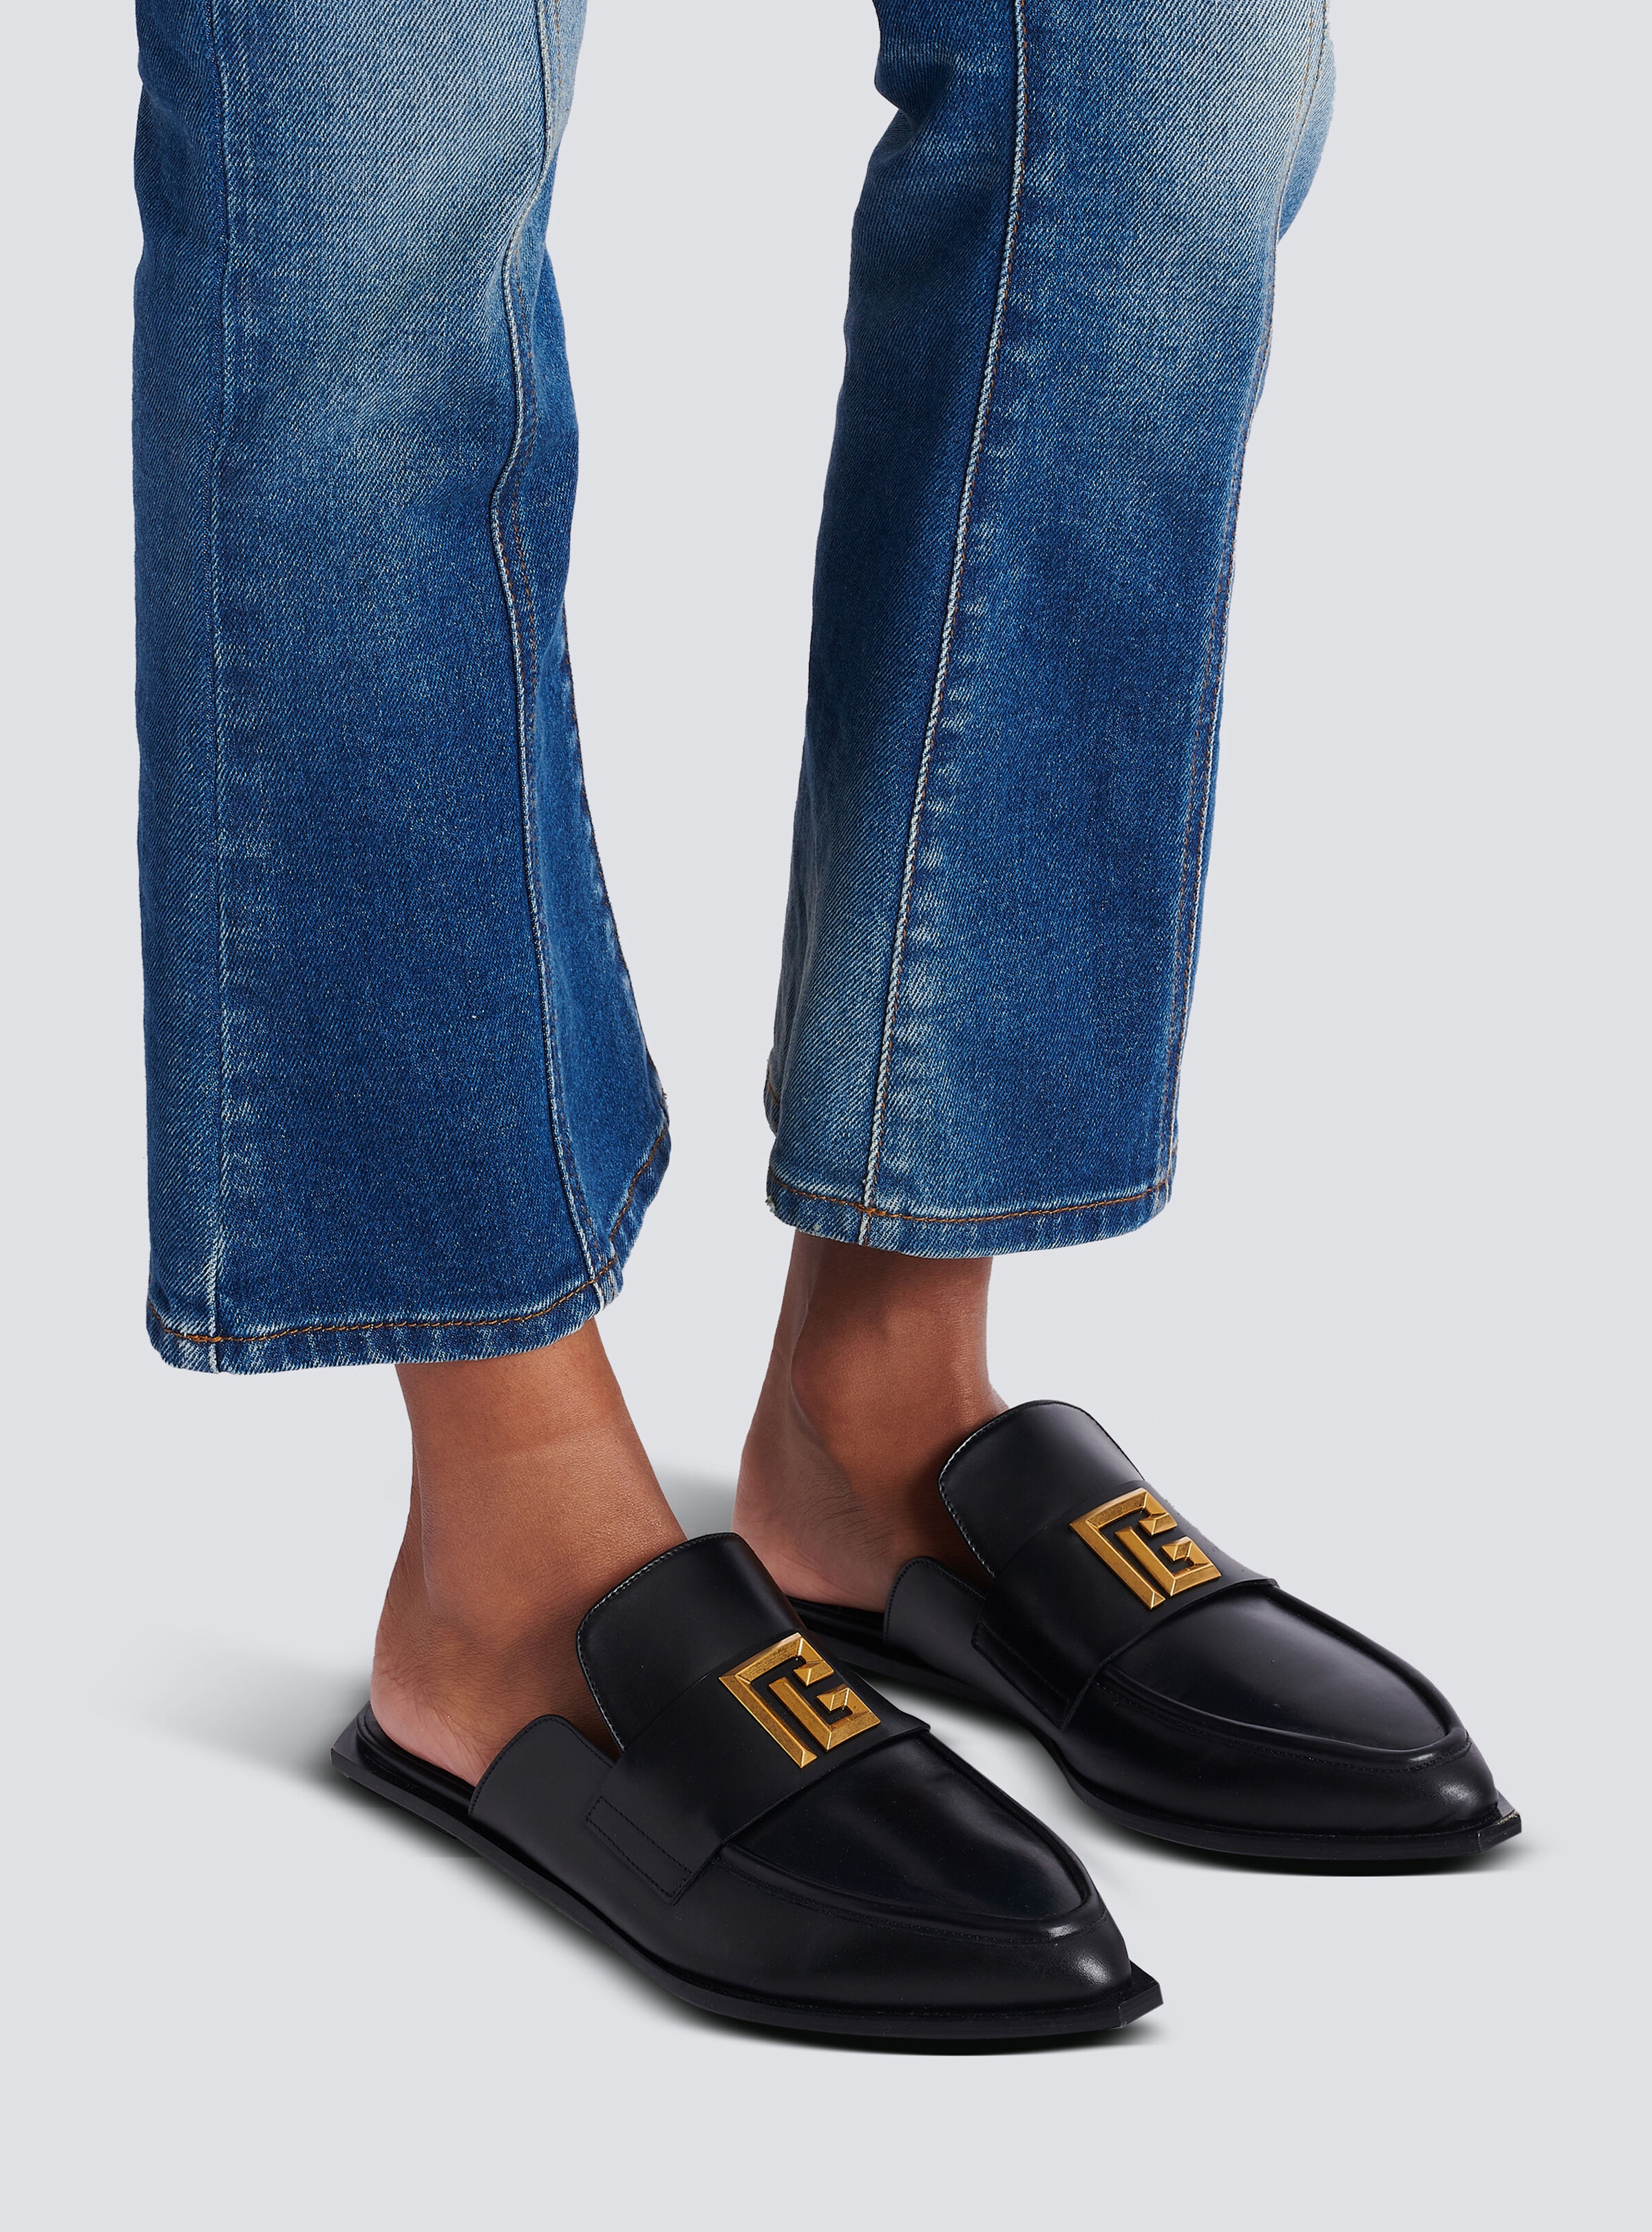 Ana leather mules - 7